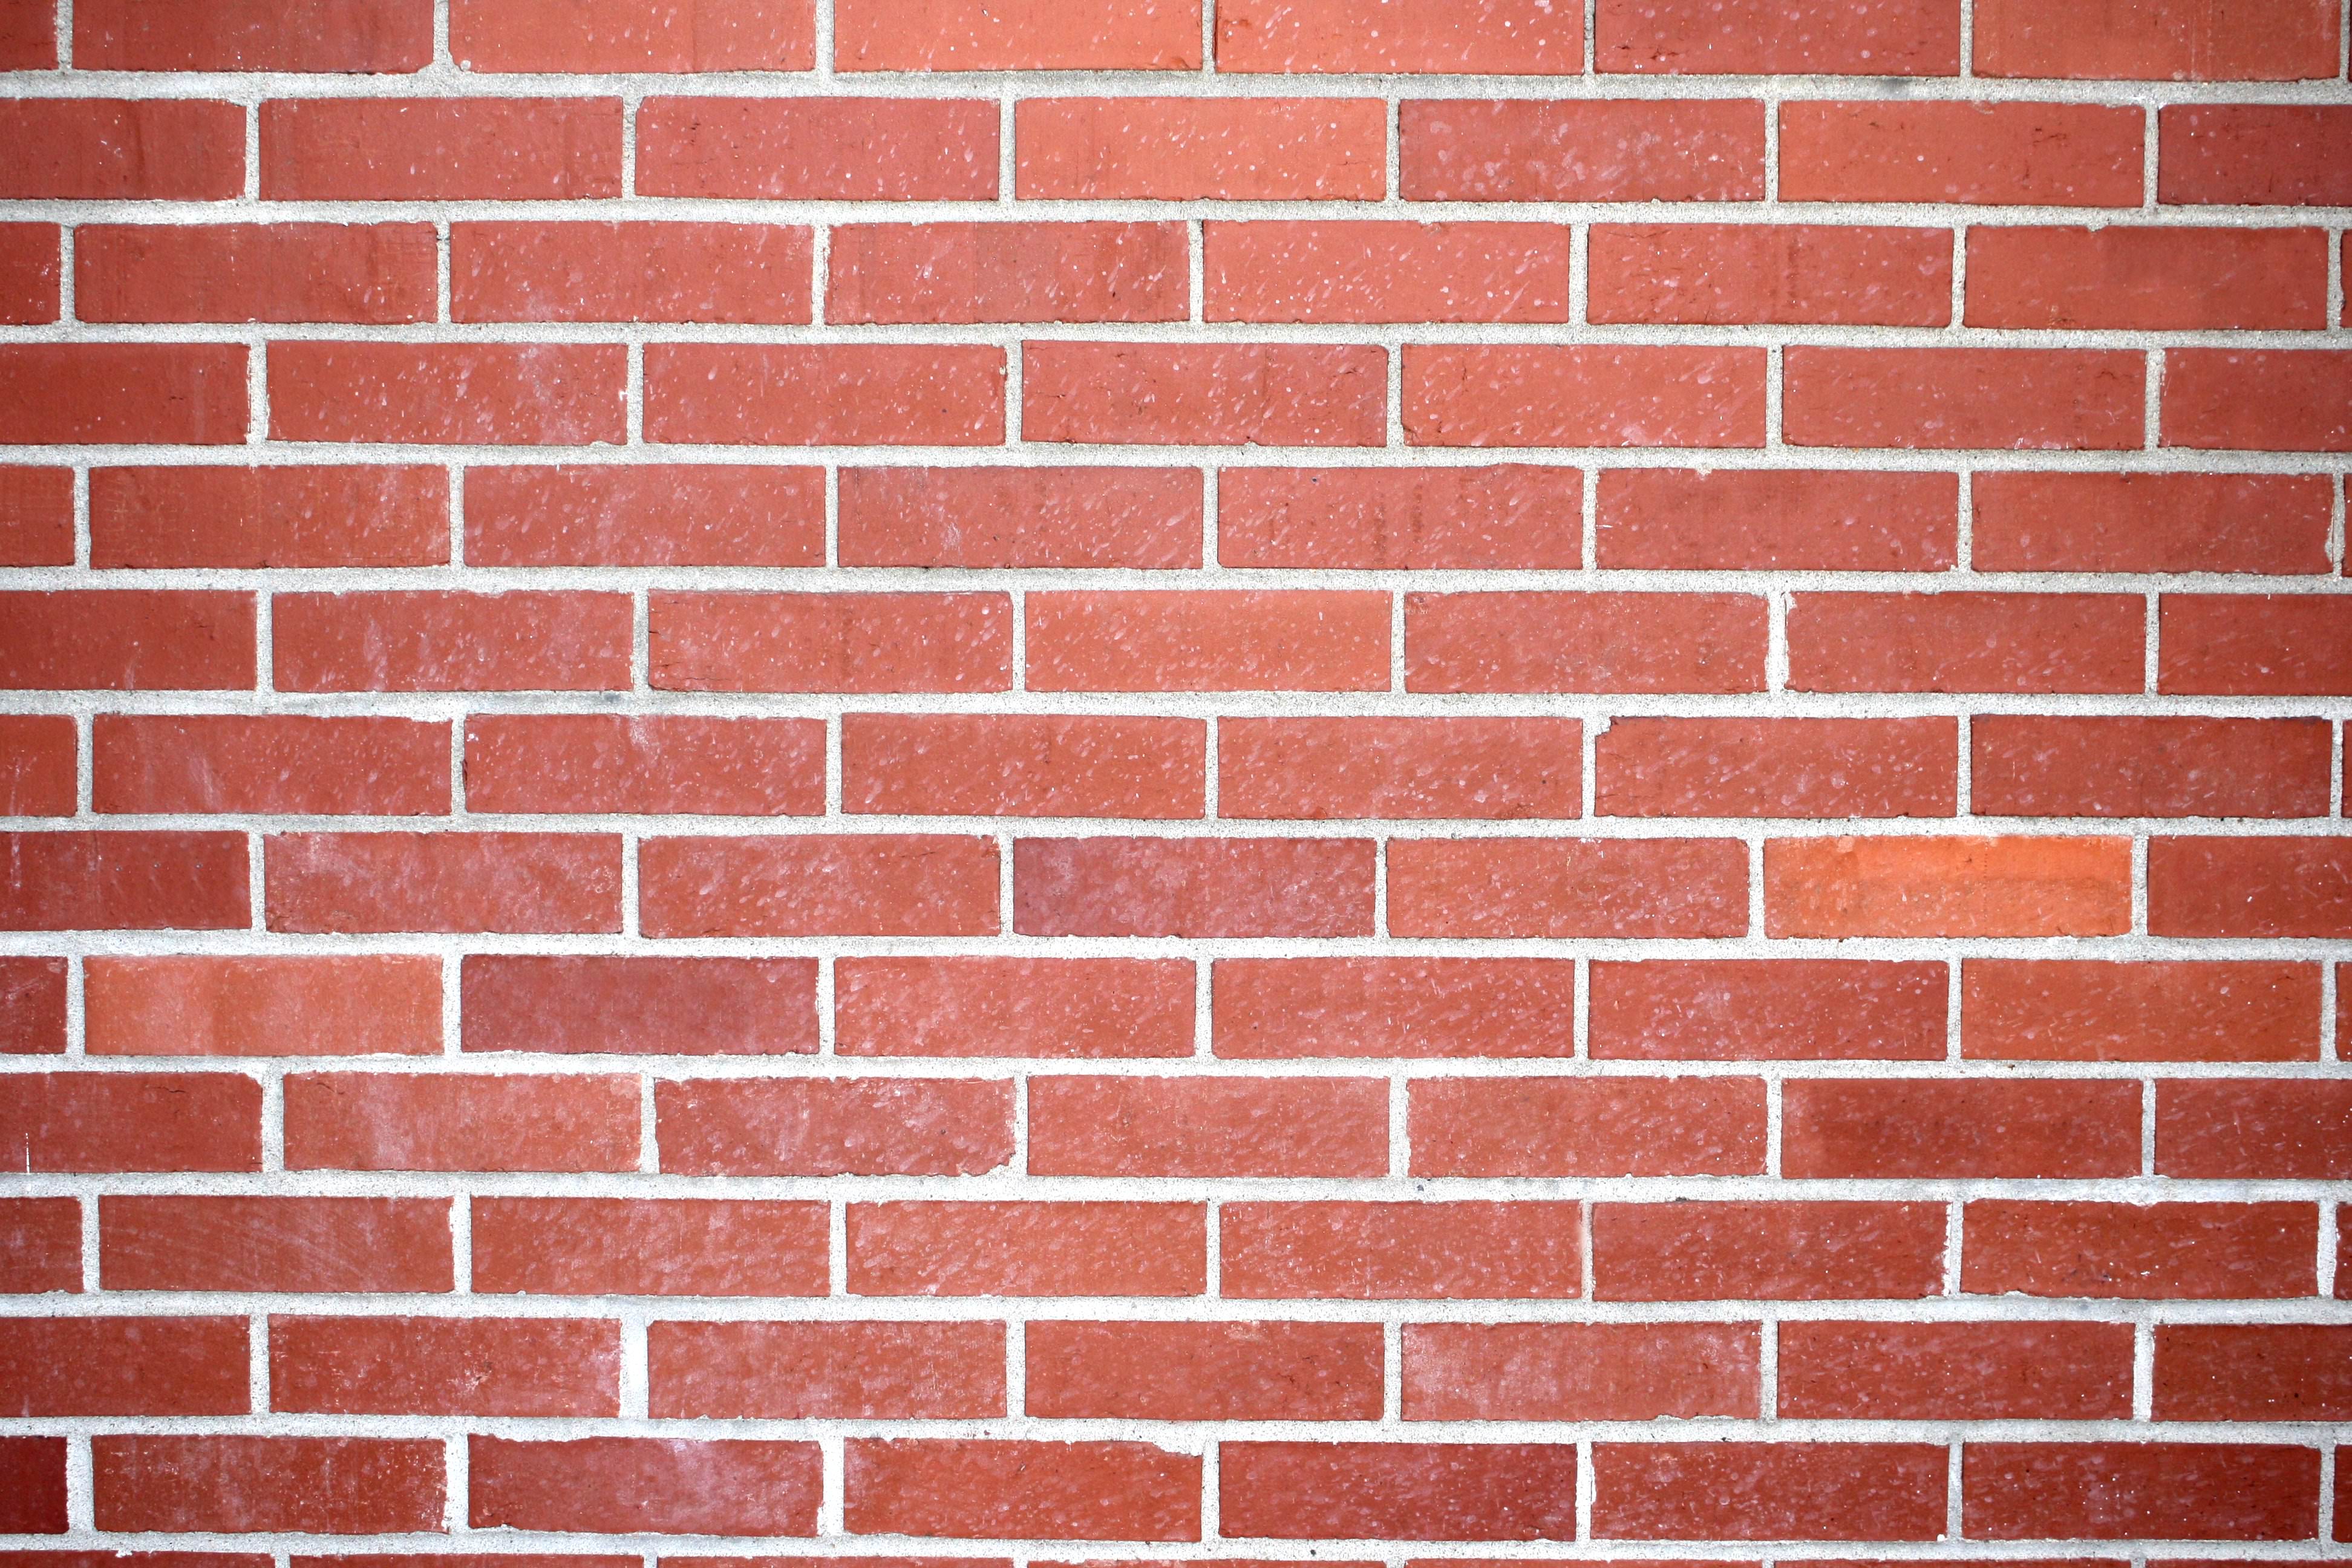 Brick wall background clipart.